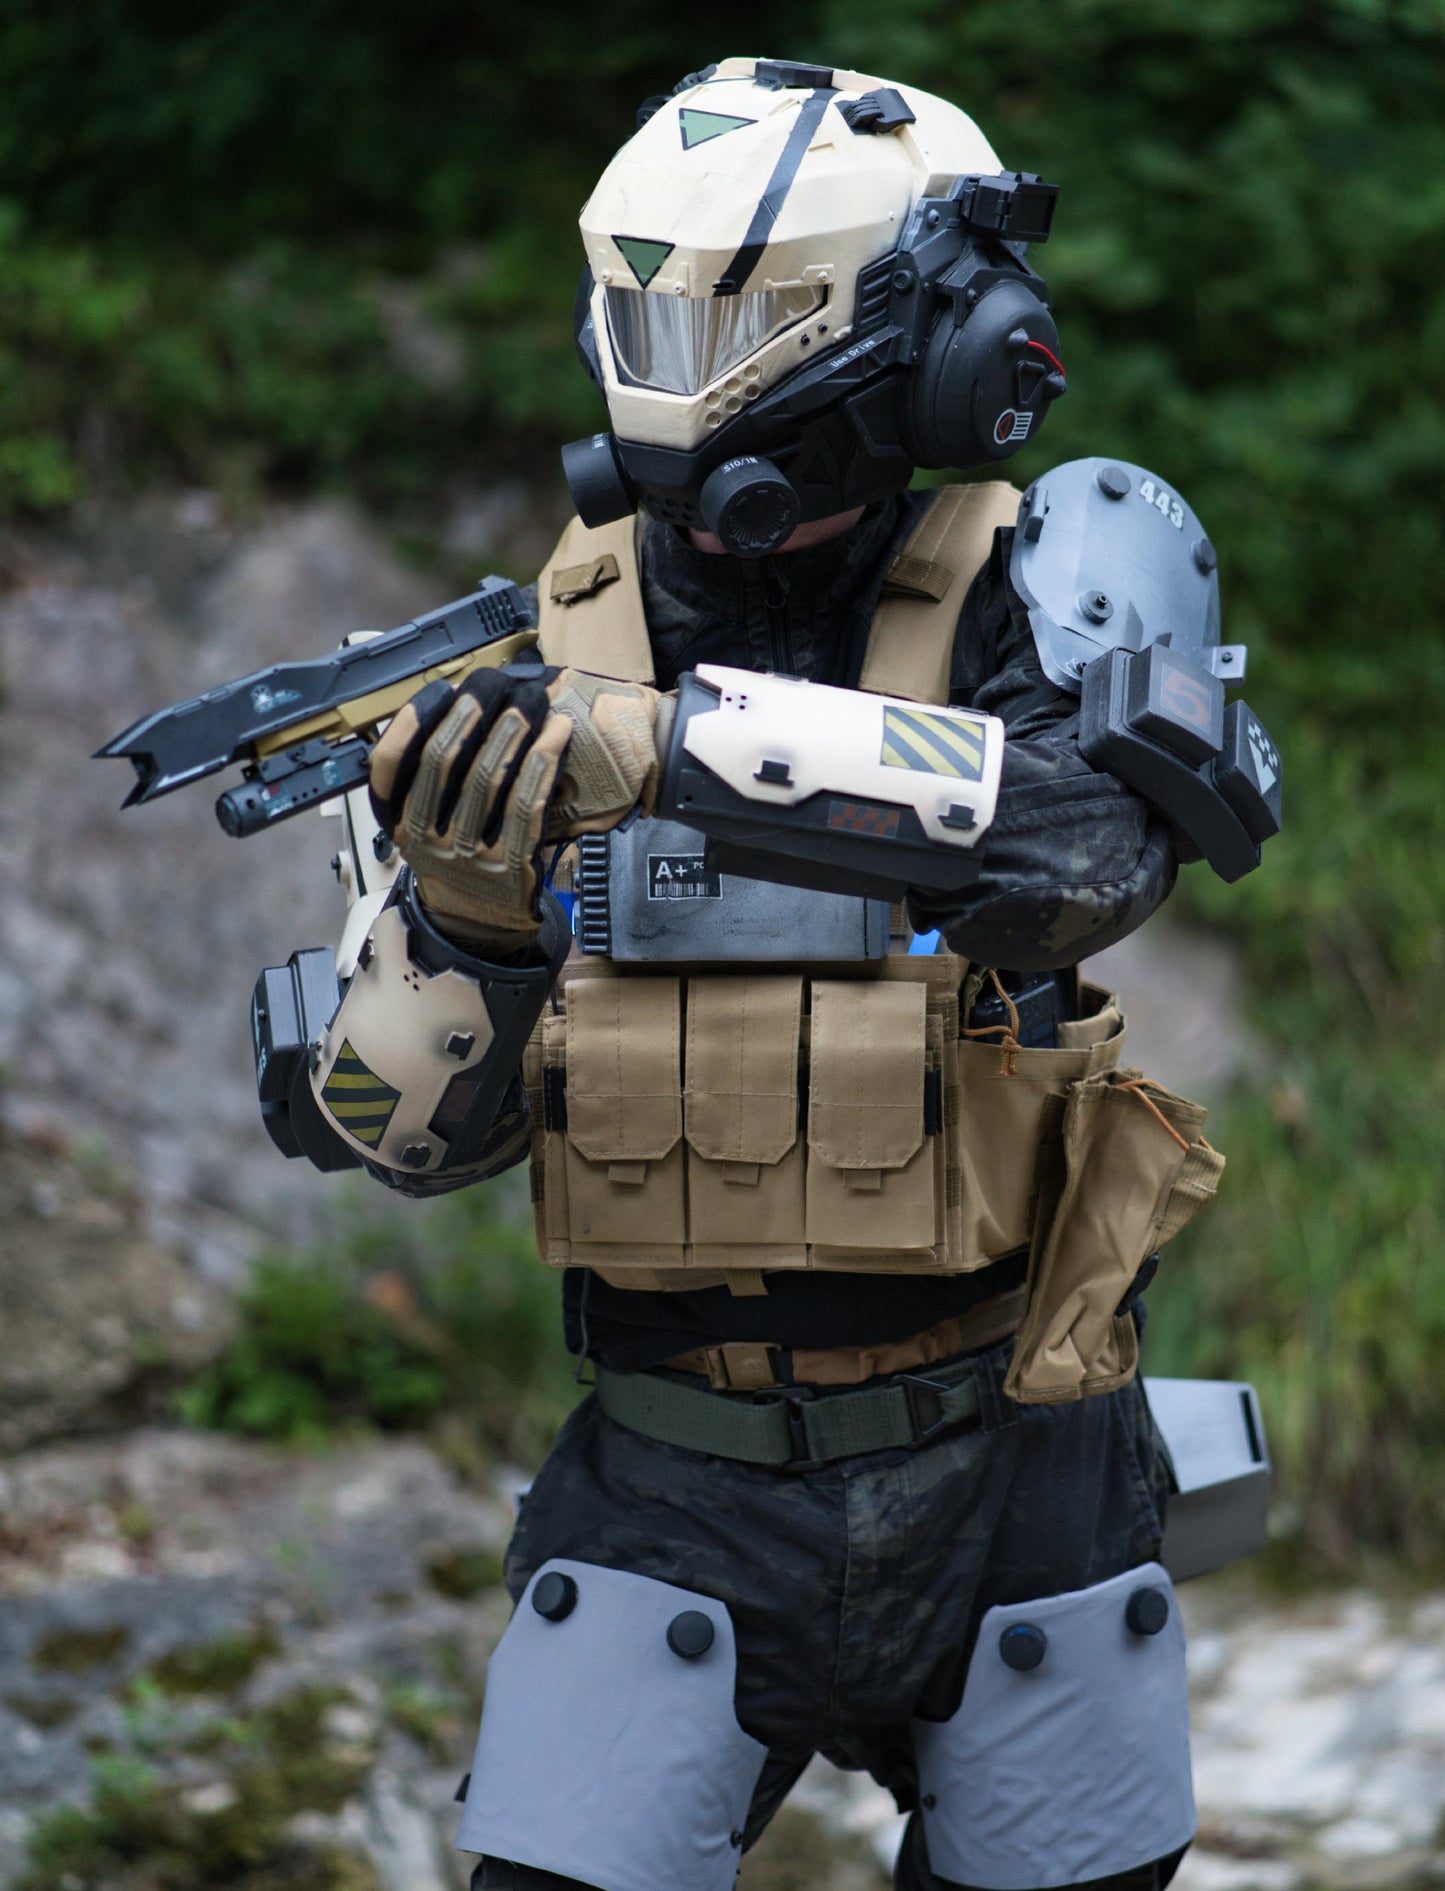 Premium fanmade "Pulse Blade Pilot" Airsoft/Cosplay Armor - Without Helmet/Jumppack